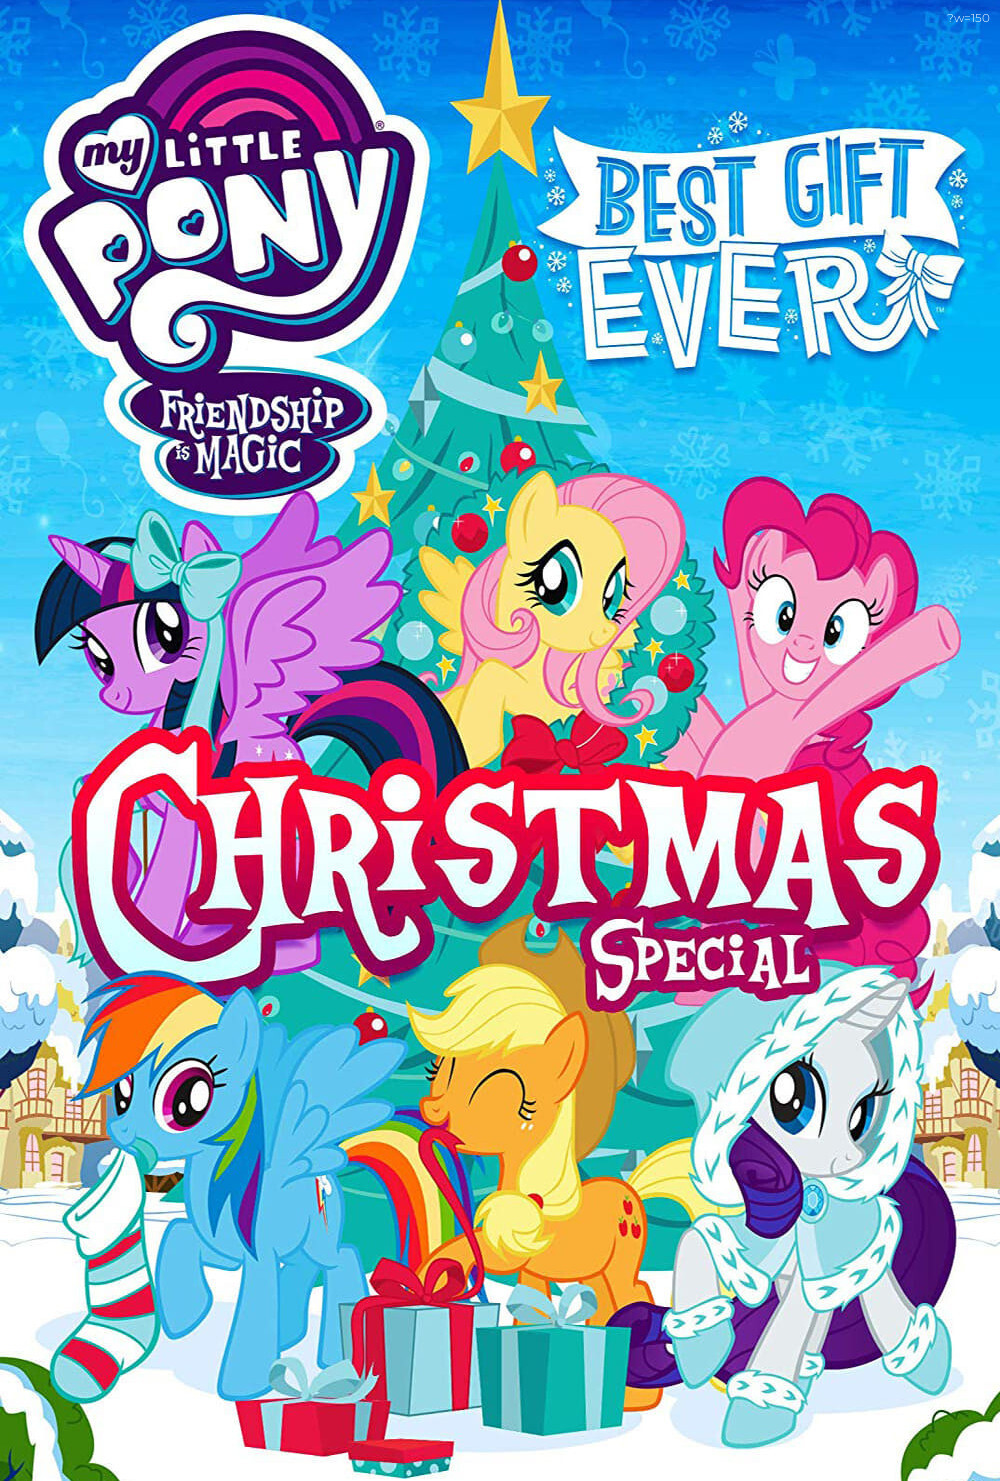 My Little Pony - Best Gift Ever